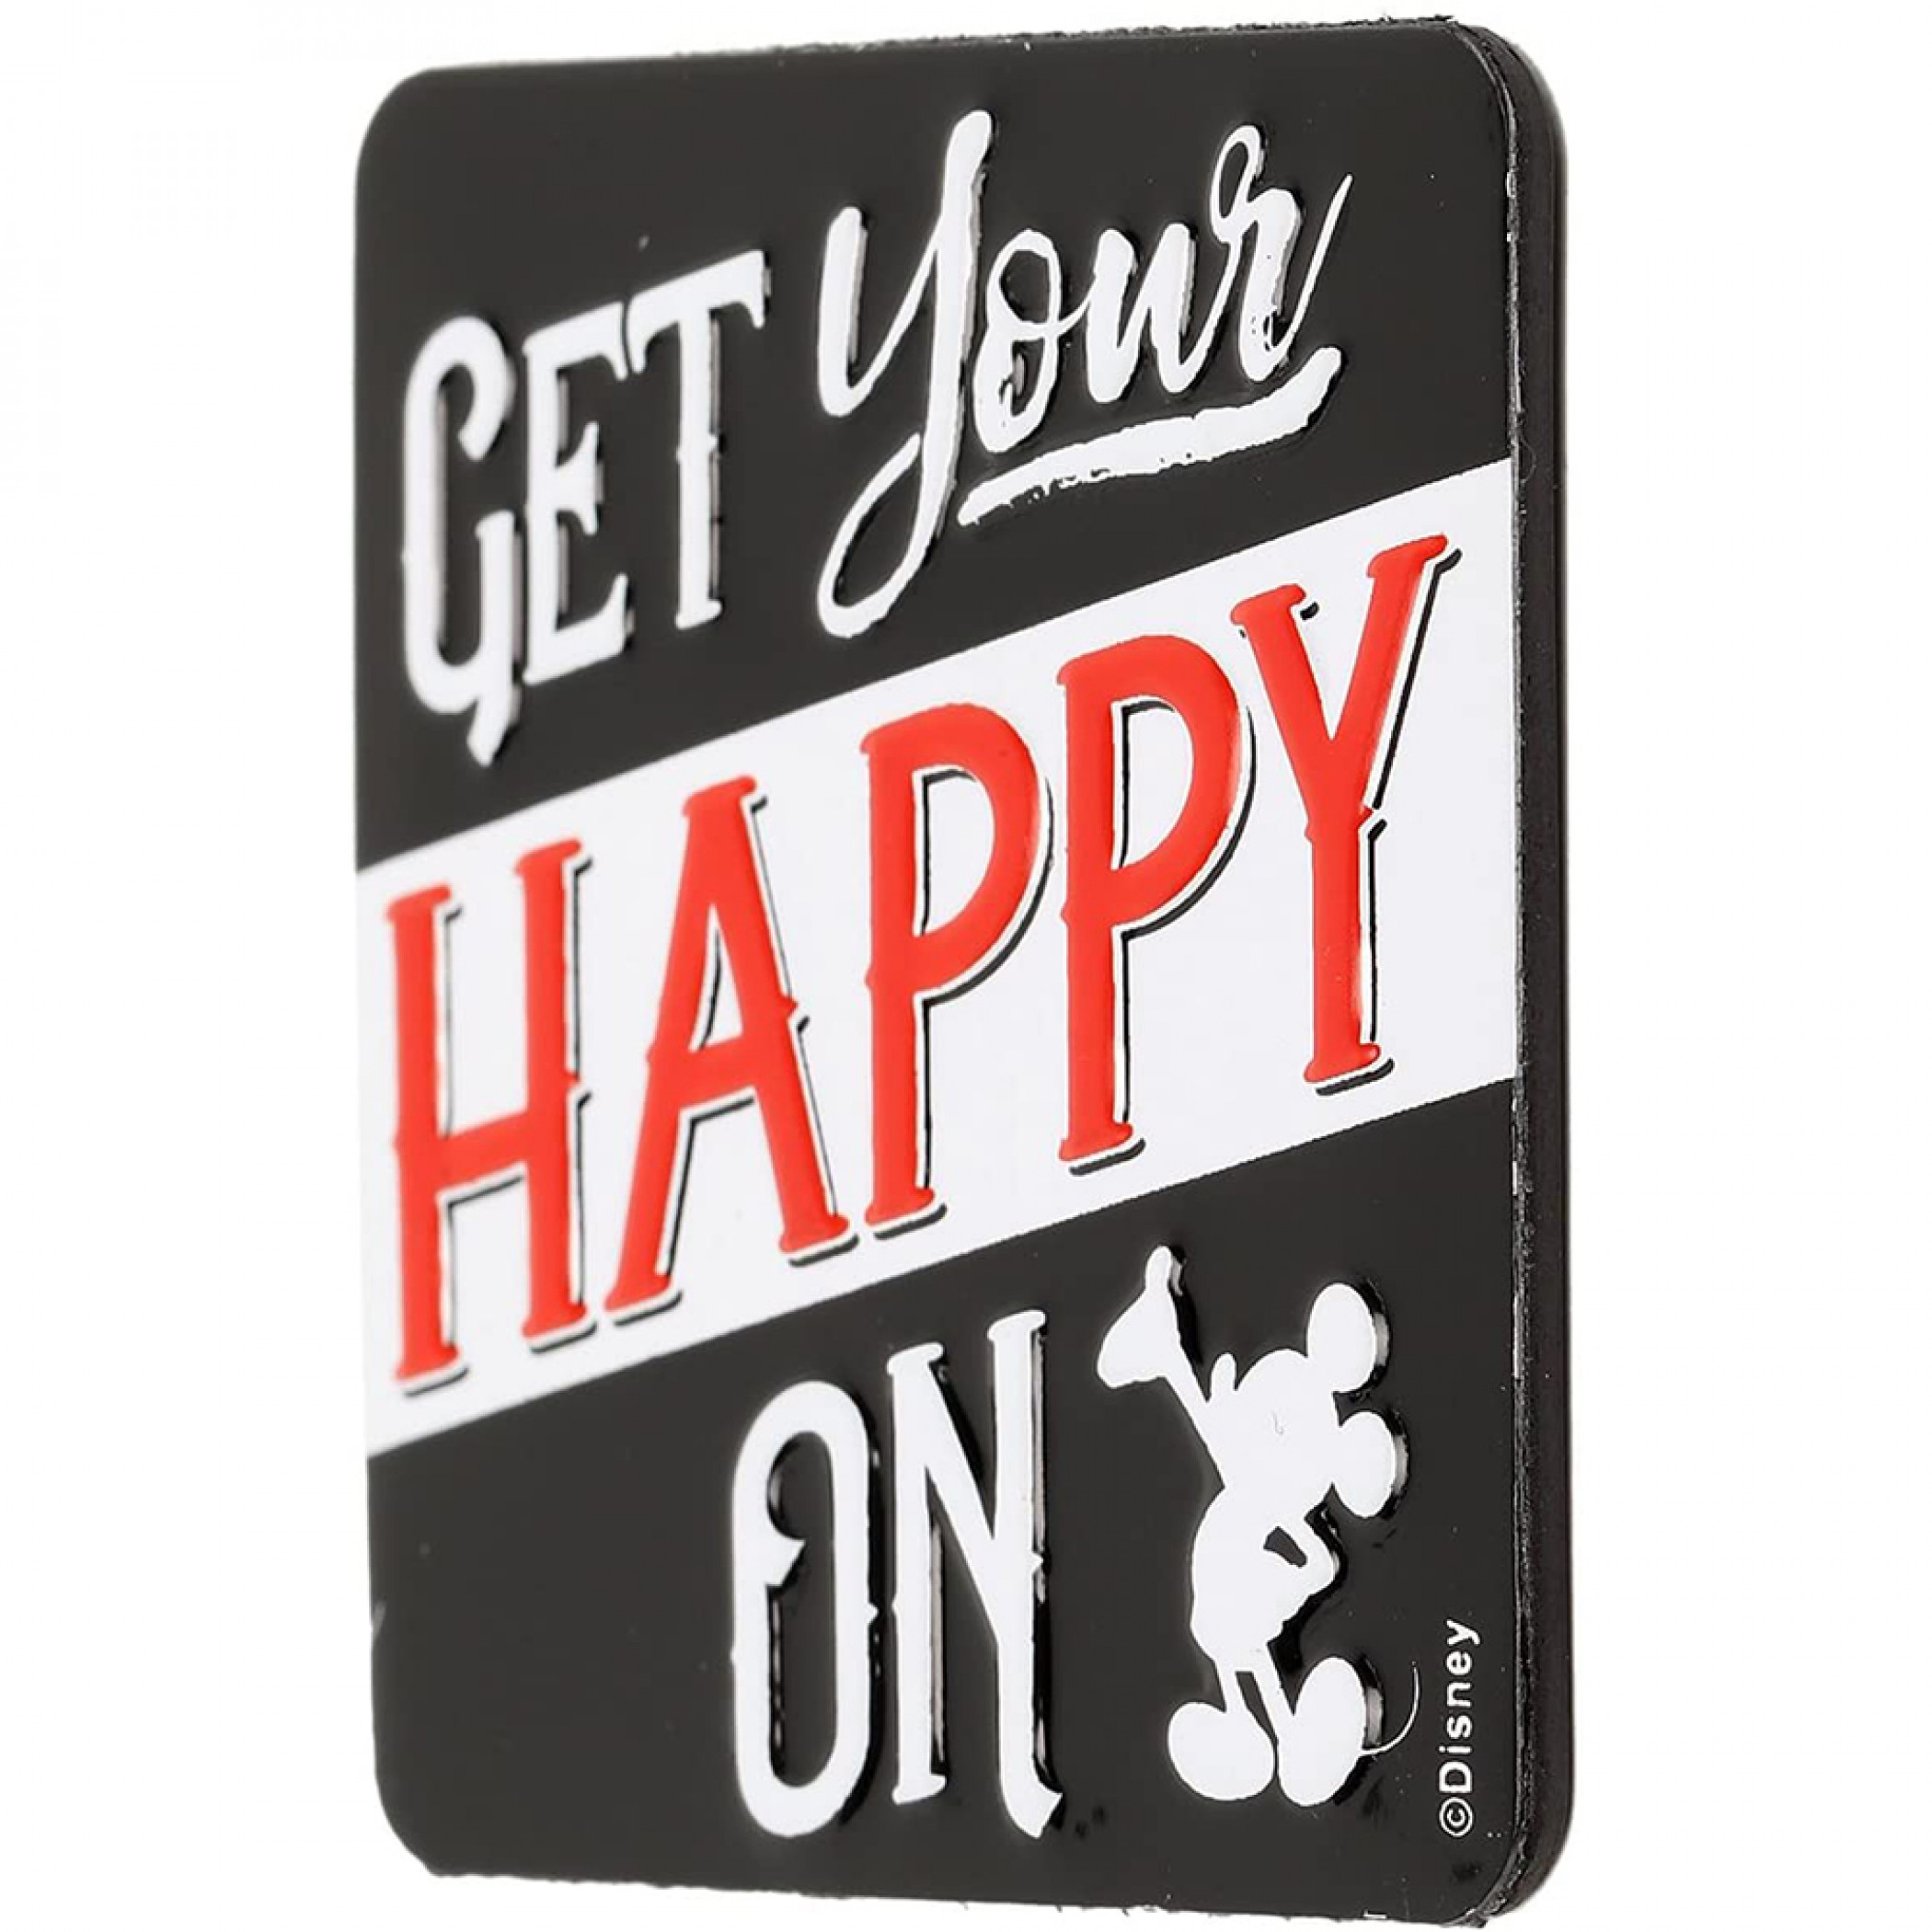 Disney Mickey Mouse Get Your Happy On Embossed Tin Magnet